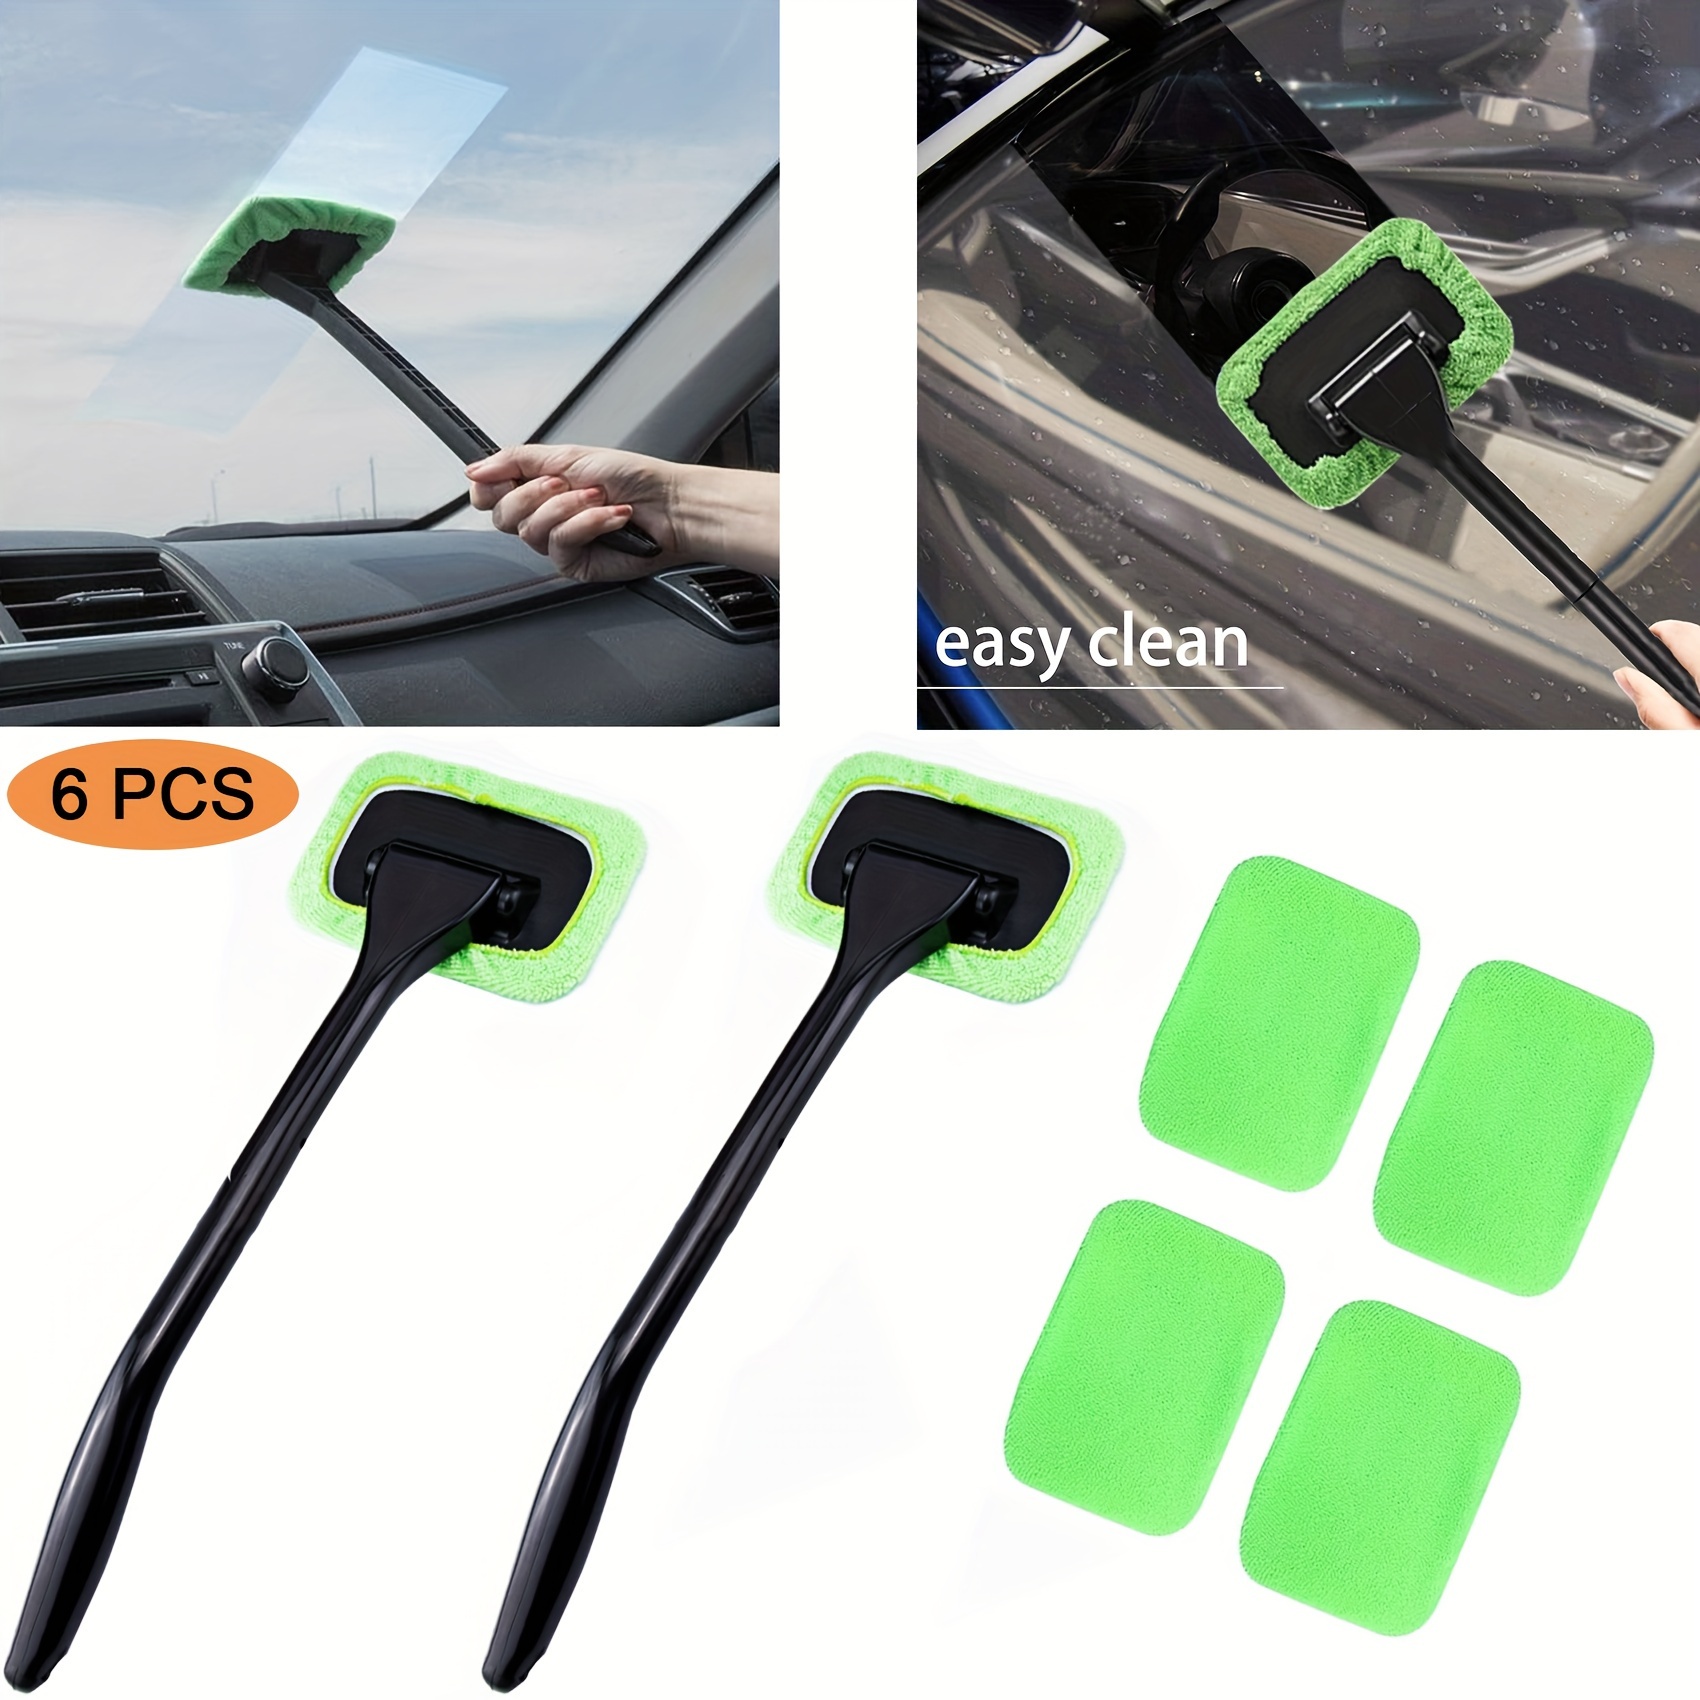 

6 Pack Car Window Cleaner, Car Windshield Cleaning Tool, Microfiber Cloth Car Window Cleanser Brush With 6 Washable And Reusable Cloth Pad Head